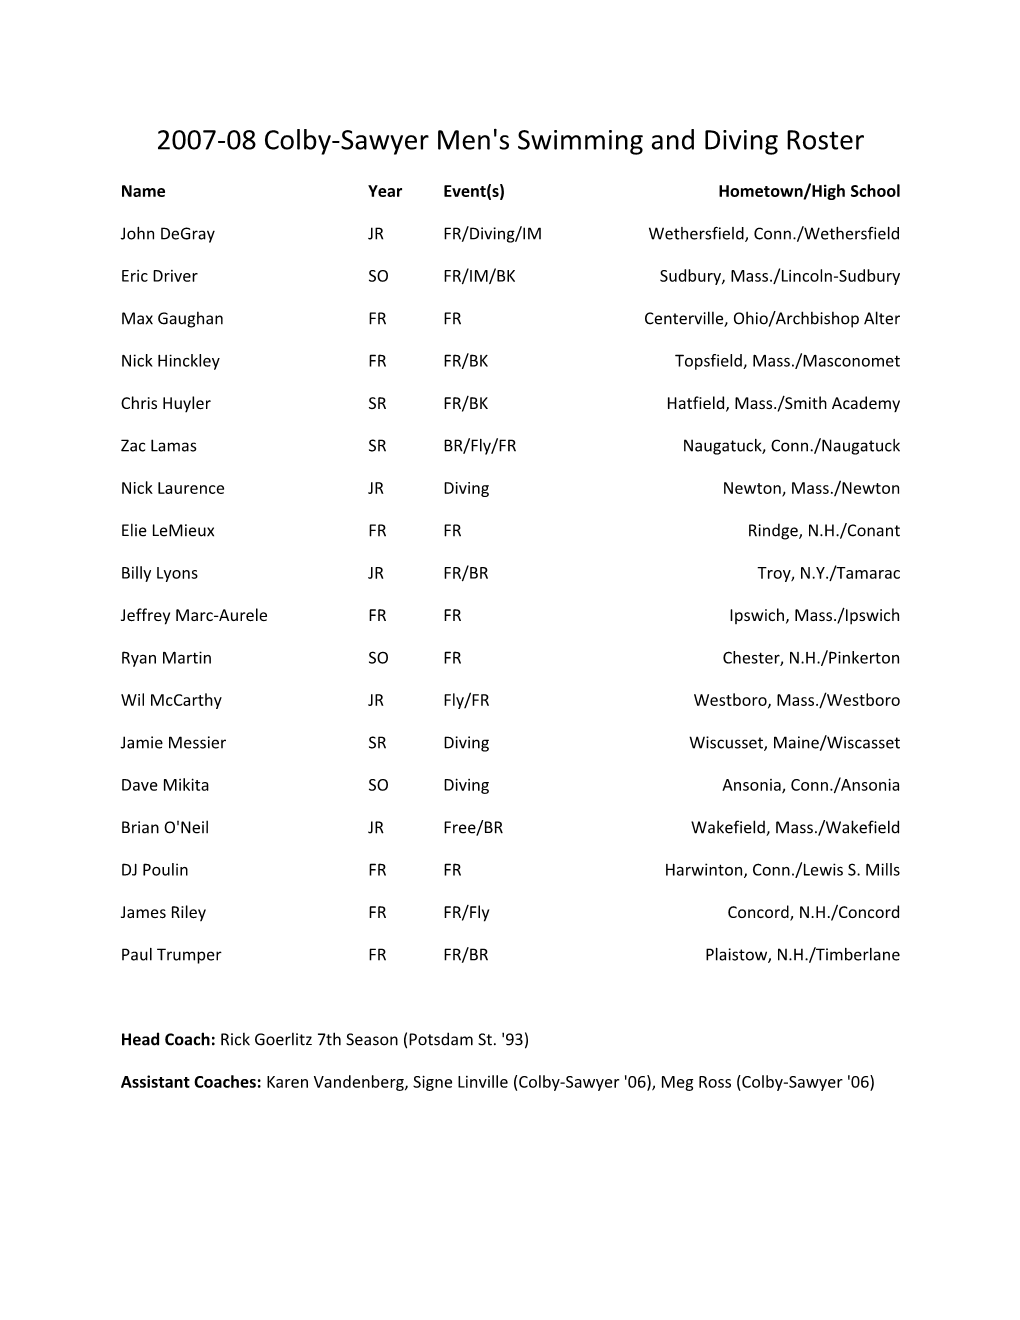 2007-08 Colby-Sawyer Men's Swimming and Diving Roster